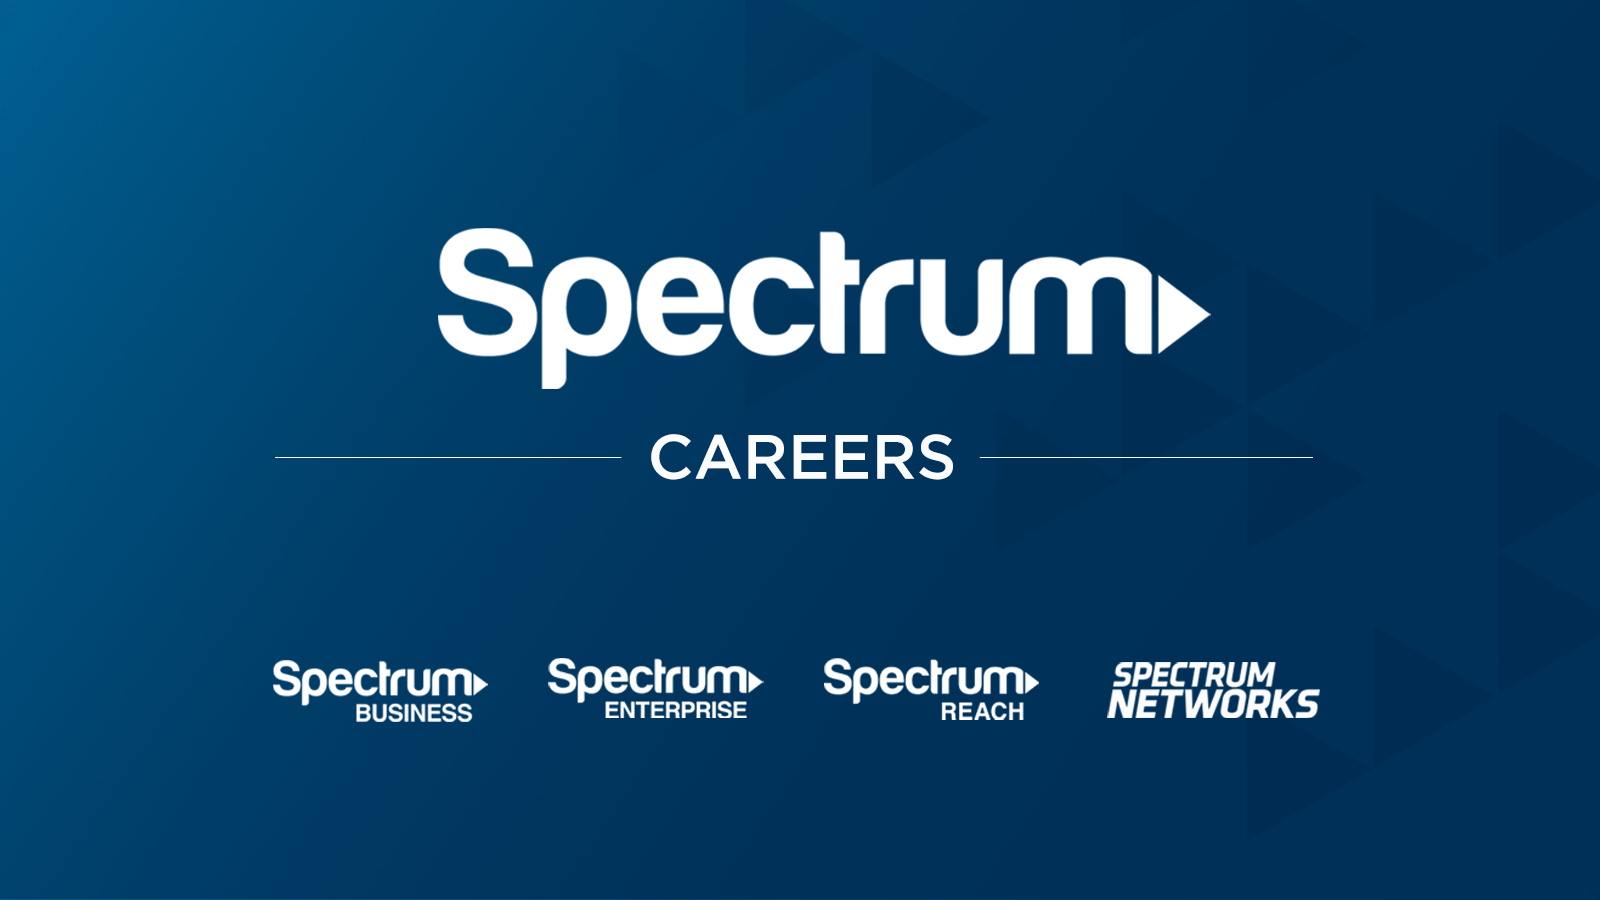 Working at Spectrum - Jobs and Careers at Spectrum